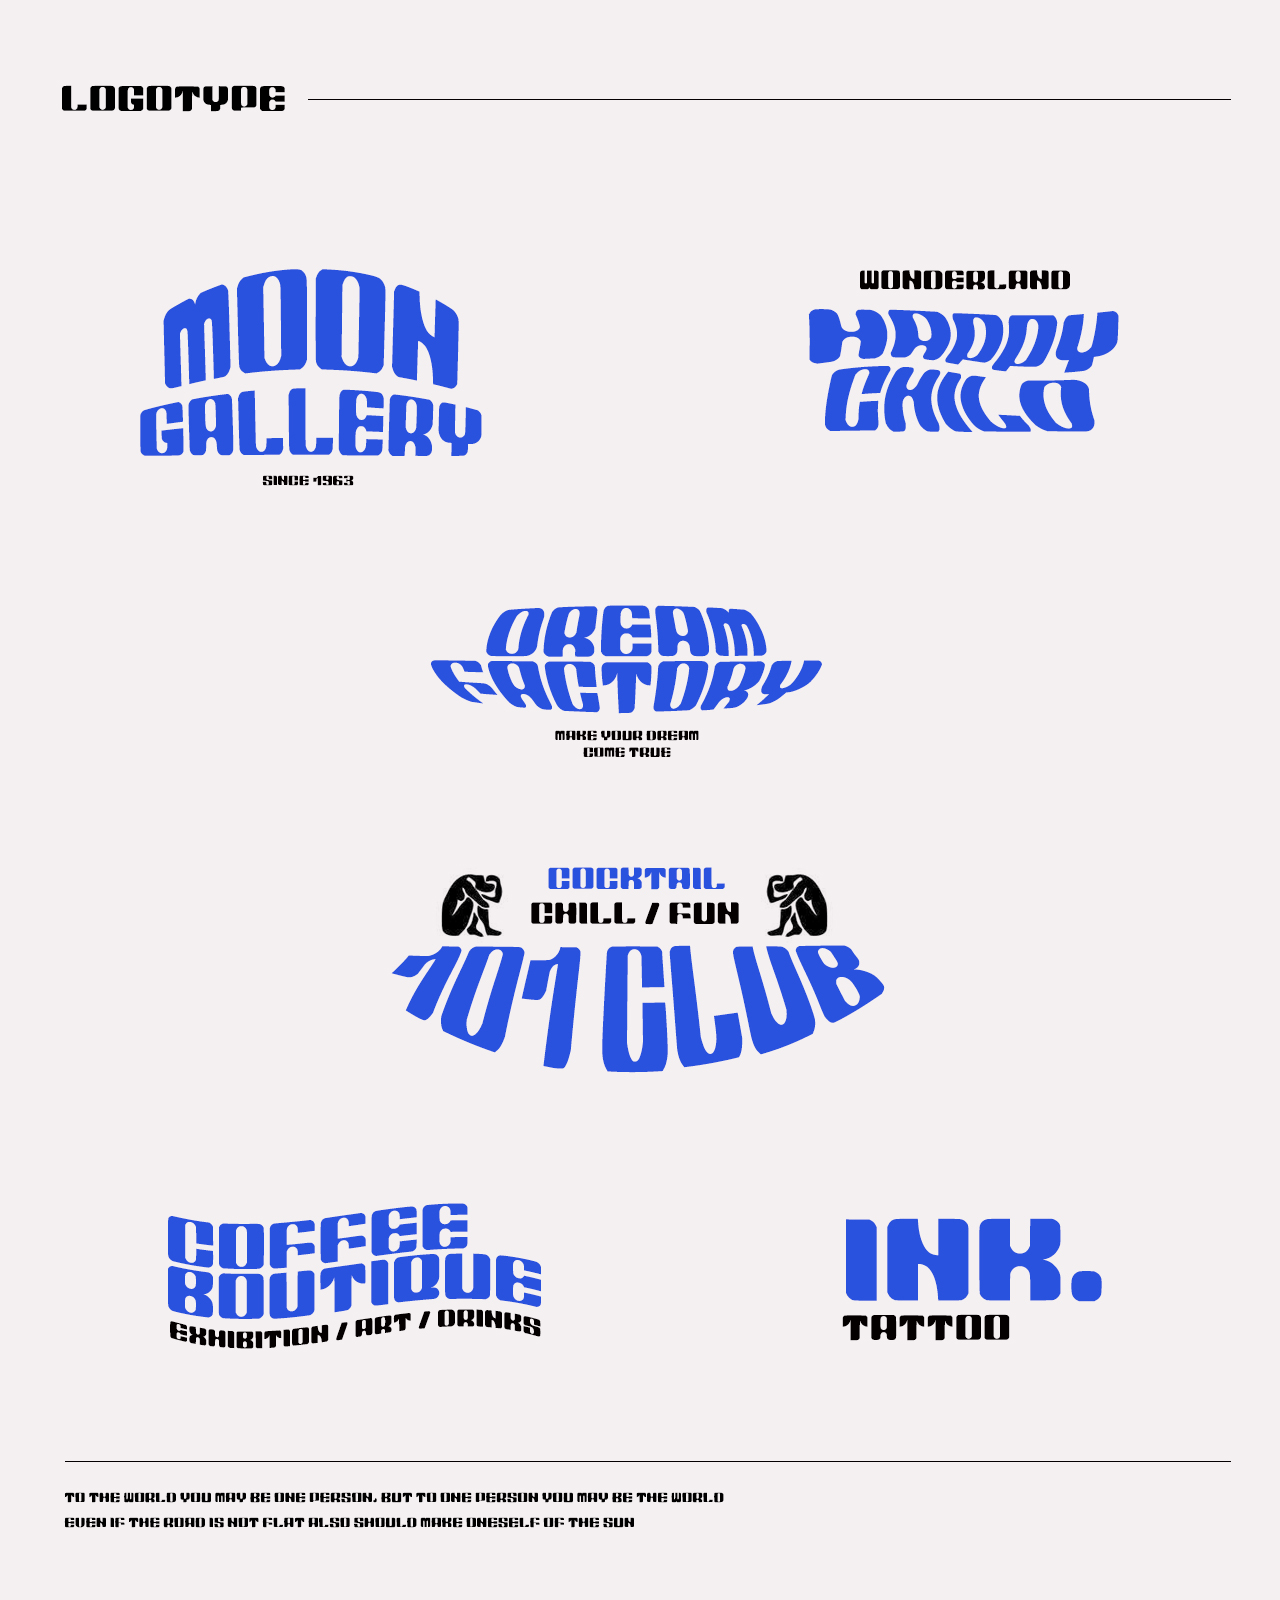 Chubby Peter English font design suitable for title